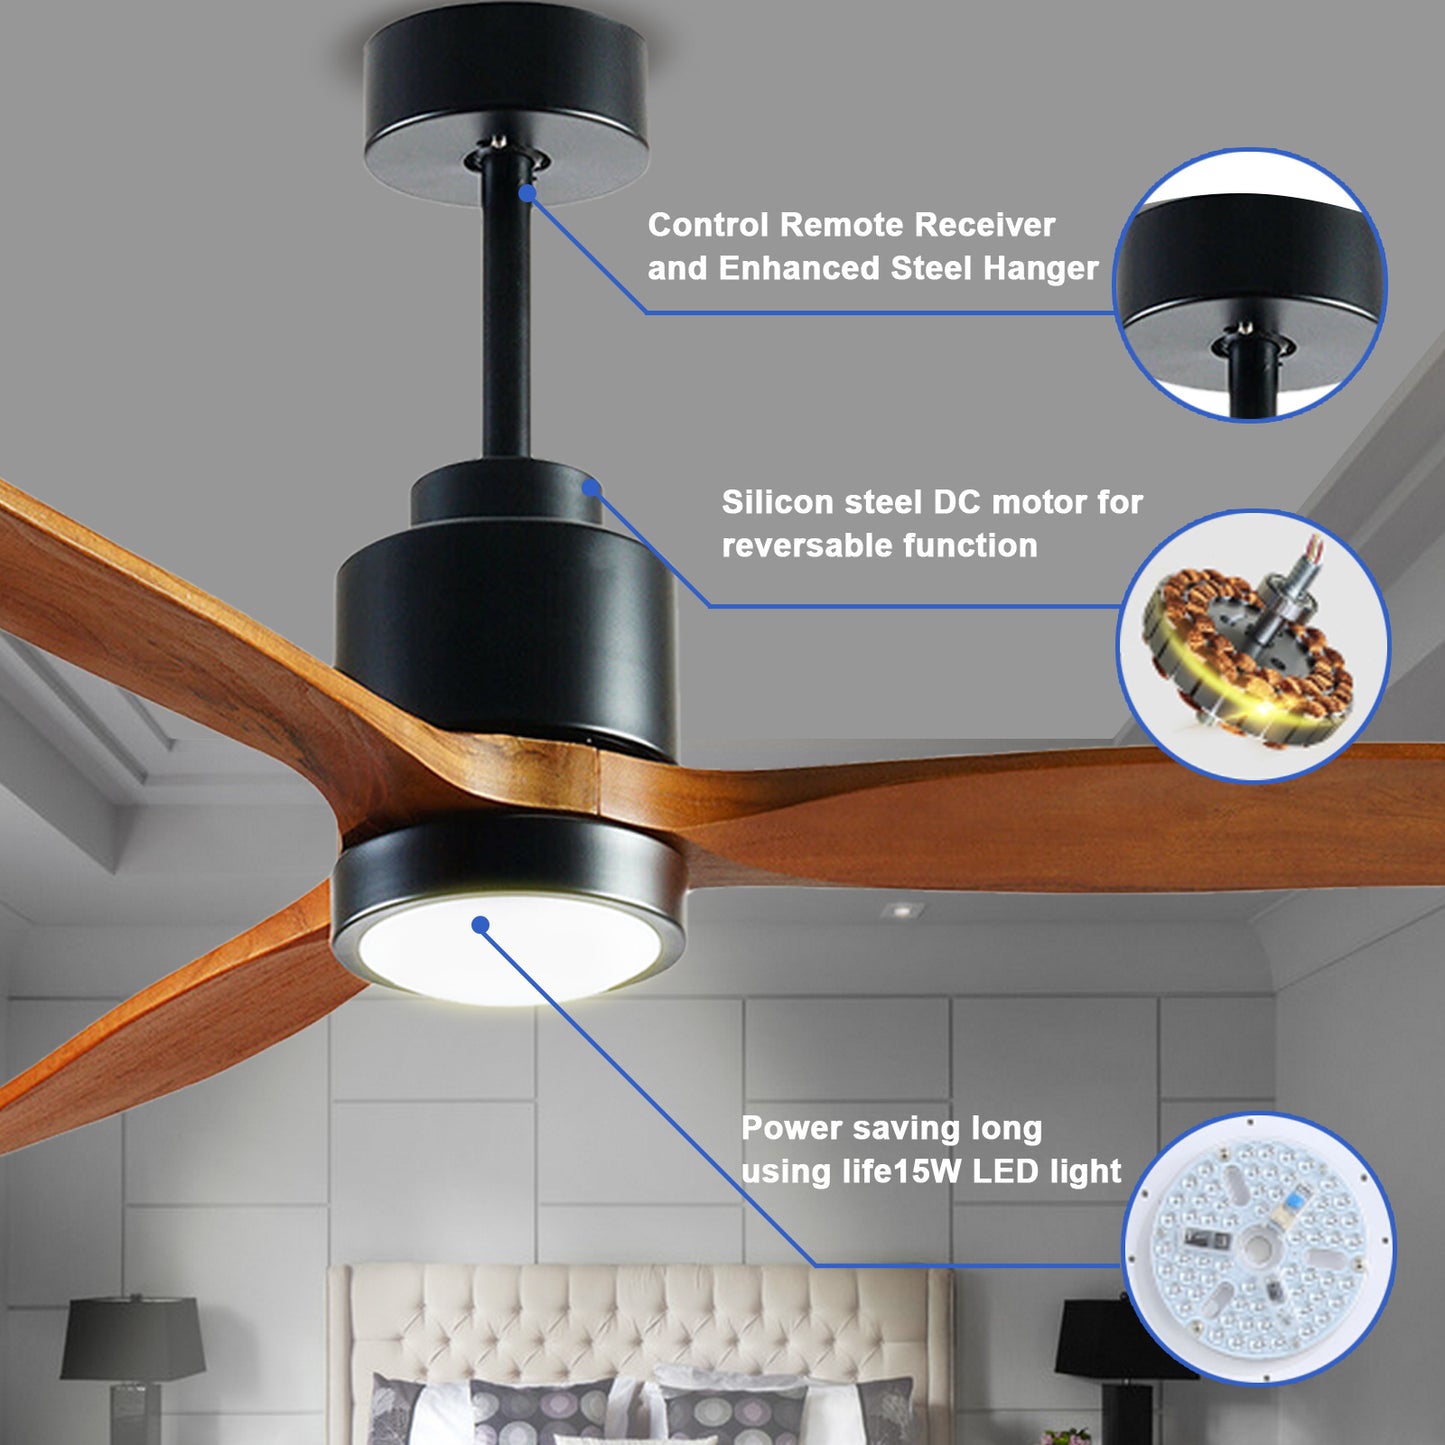 52 Wood Ceiling Fan with Remote Control and 3 Light Color Options